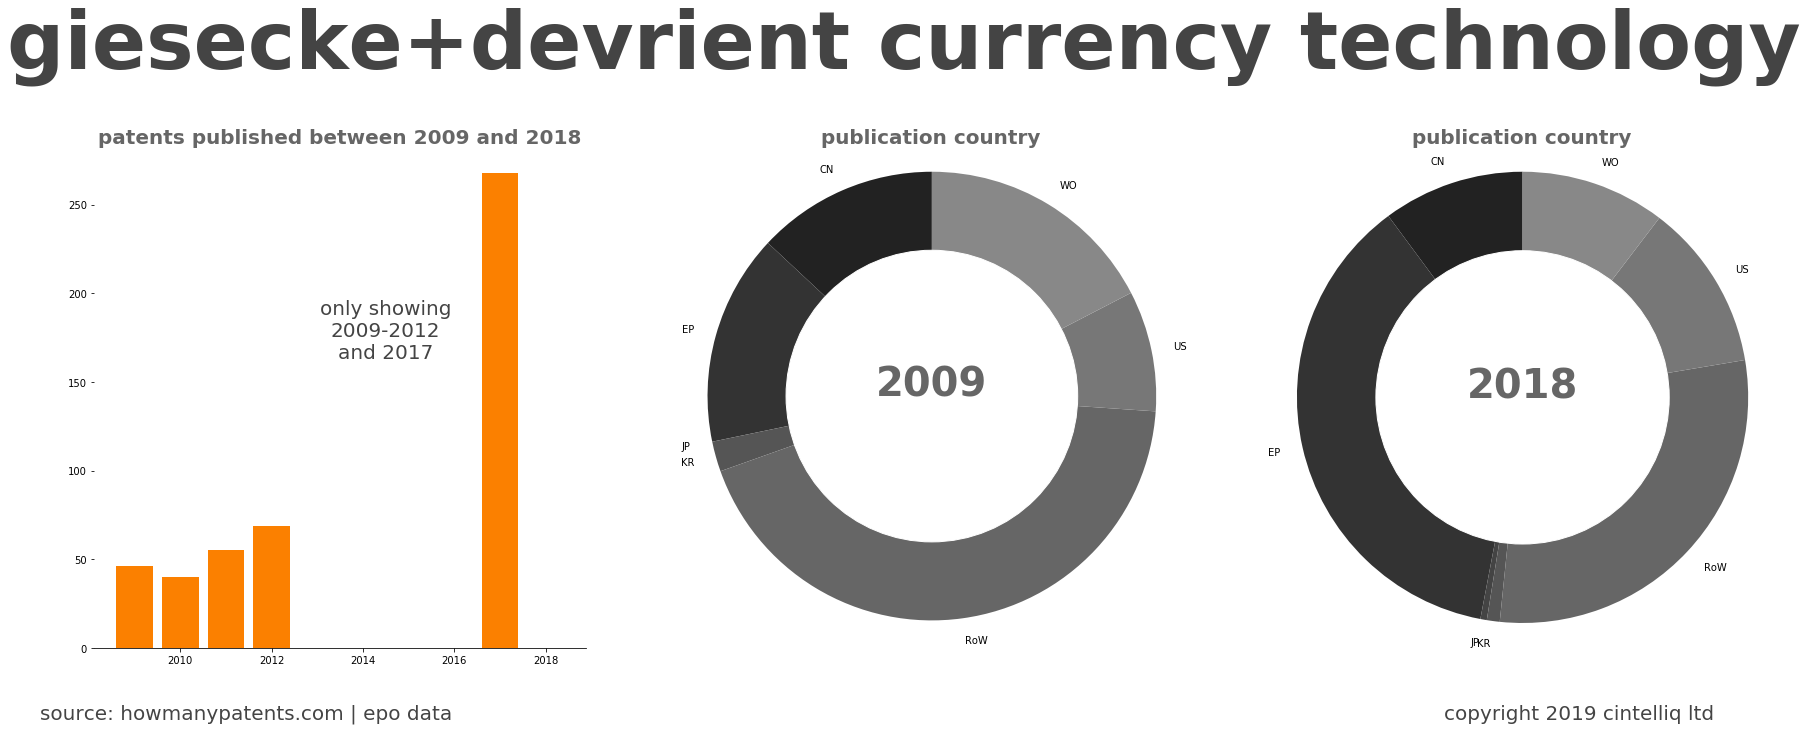 summary of patents for Giesecke+Devrient Currency Technology